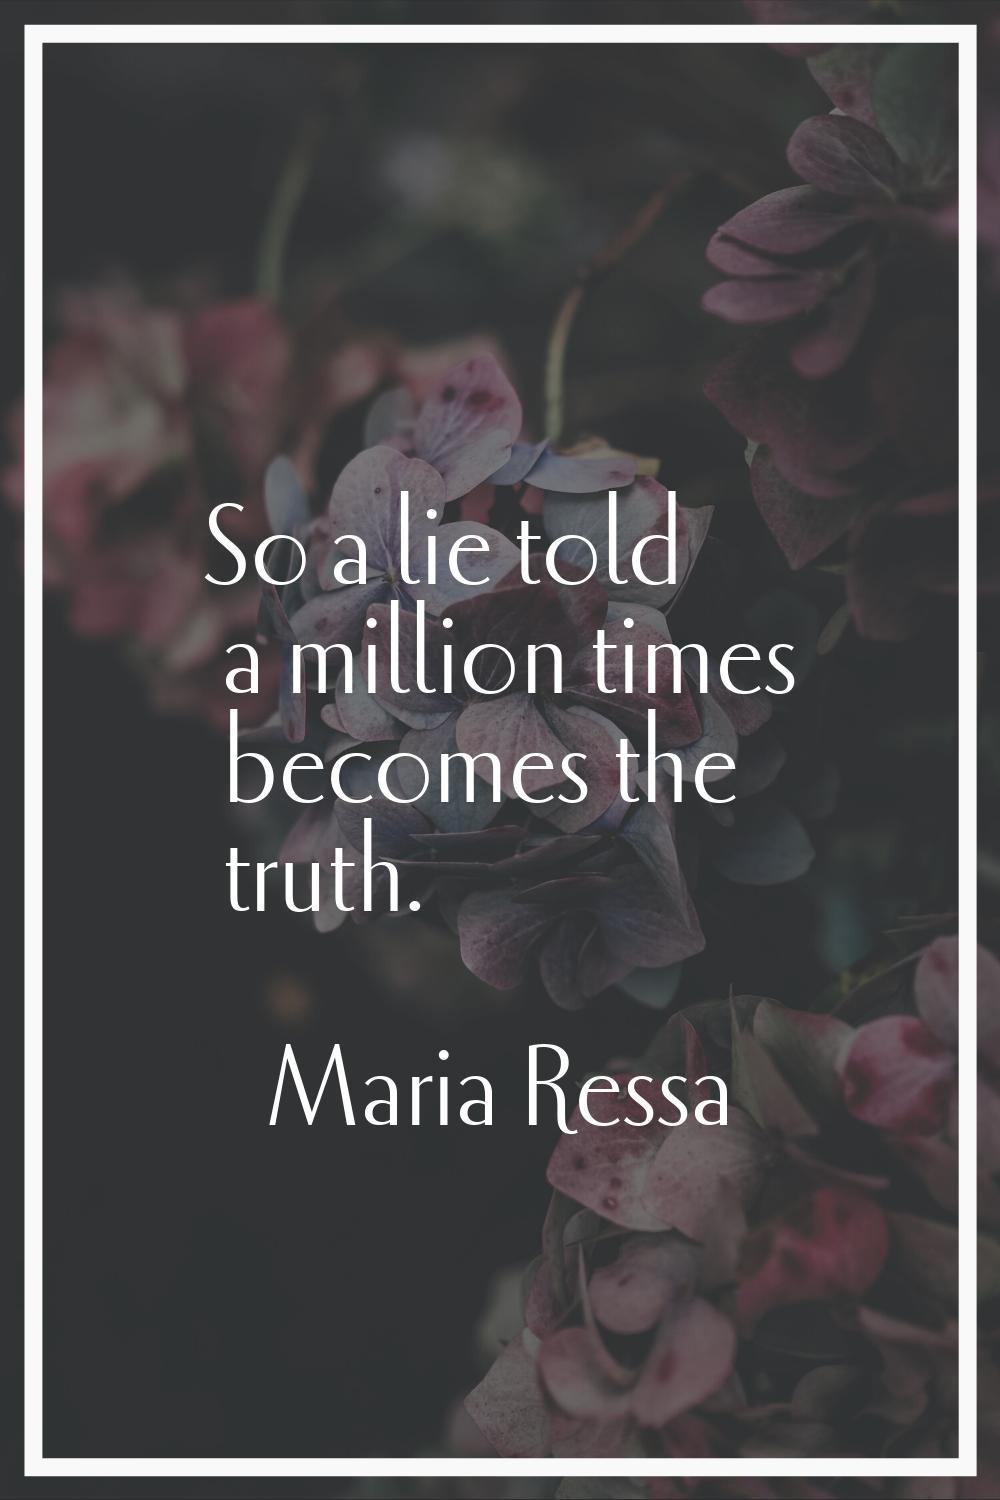 So a lie told a million times becomes the truth.